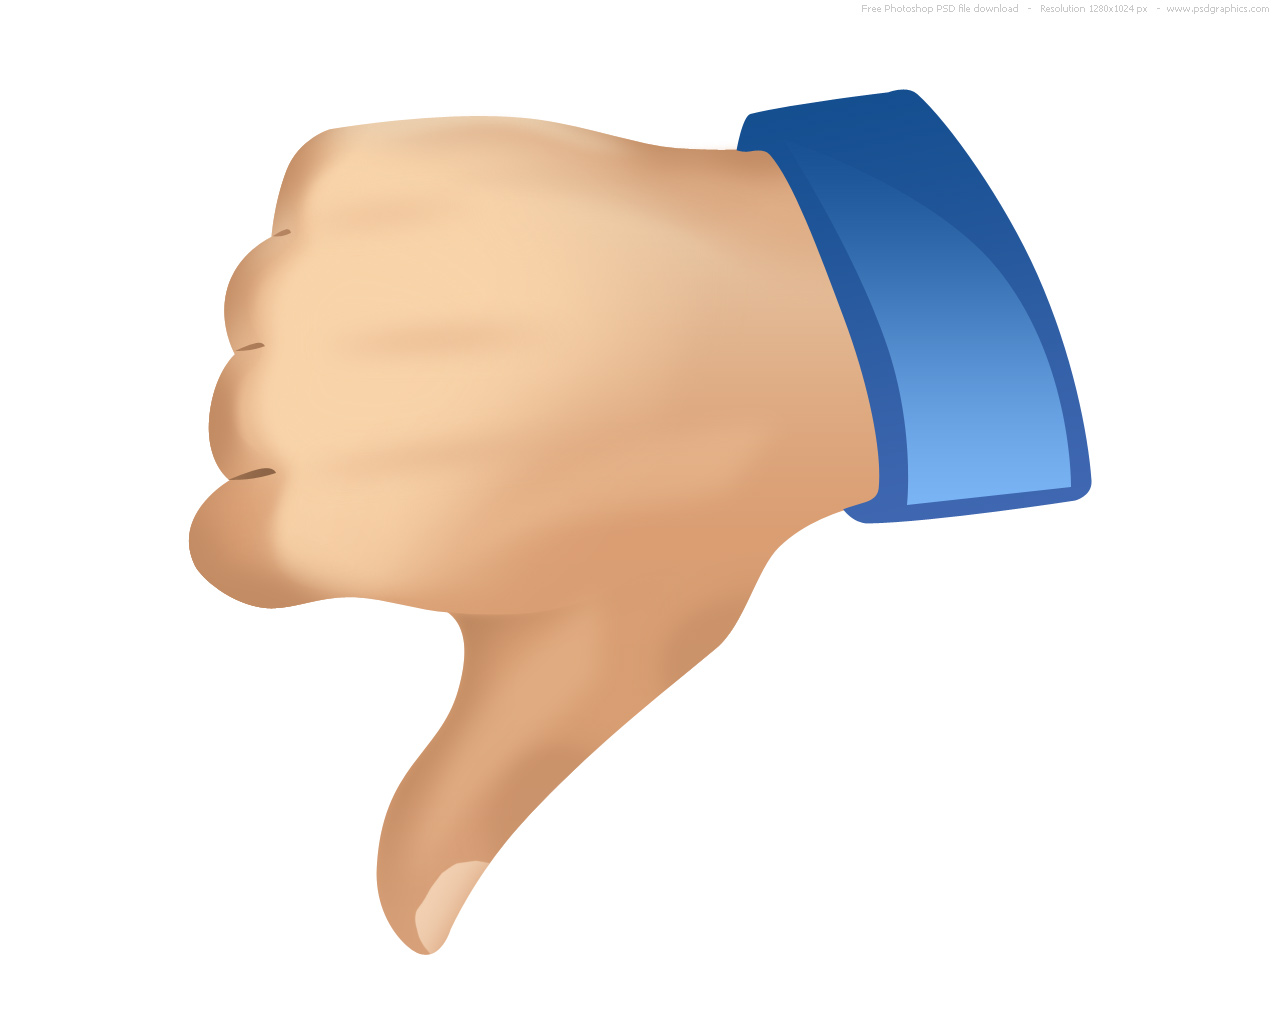 Thumbs Down Image - ClipArt Best